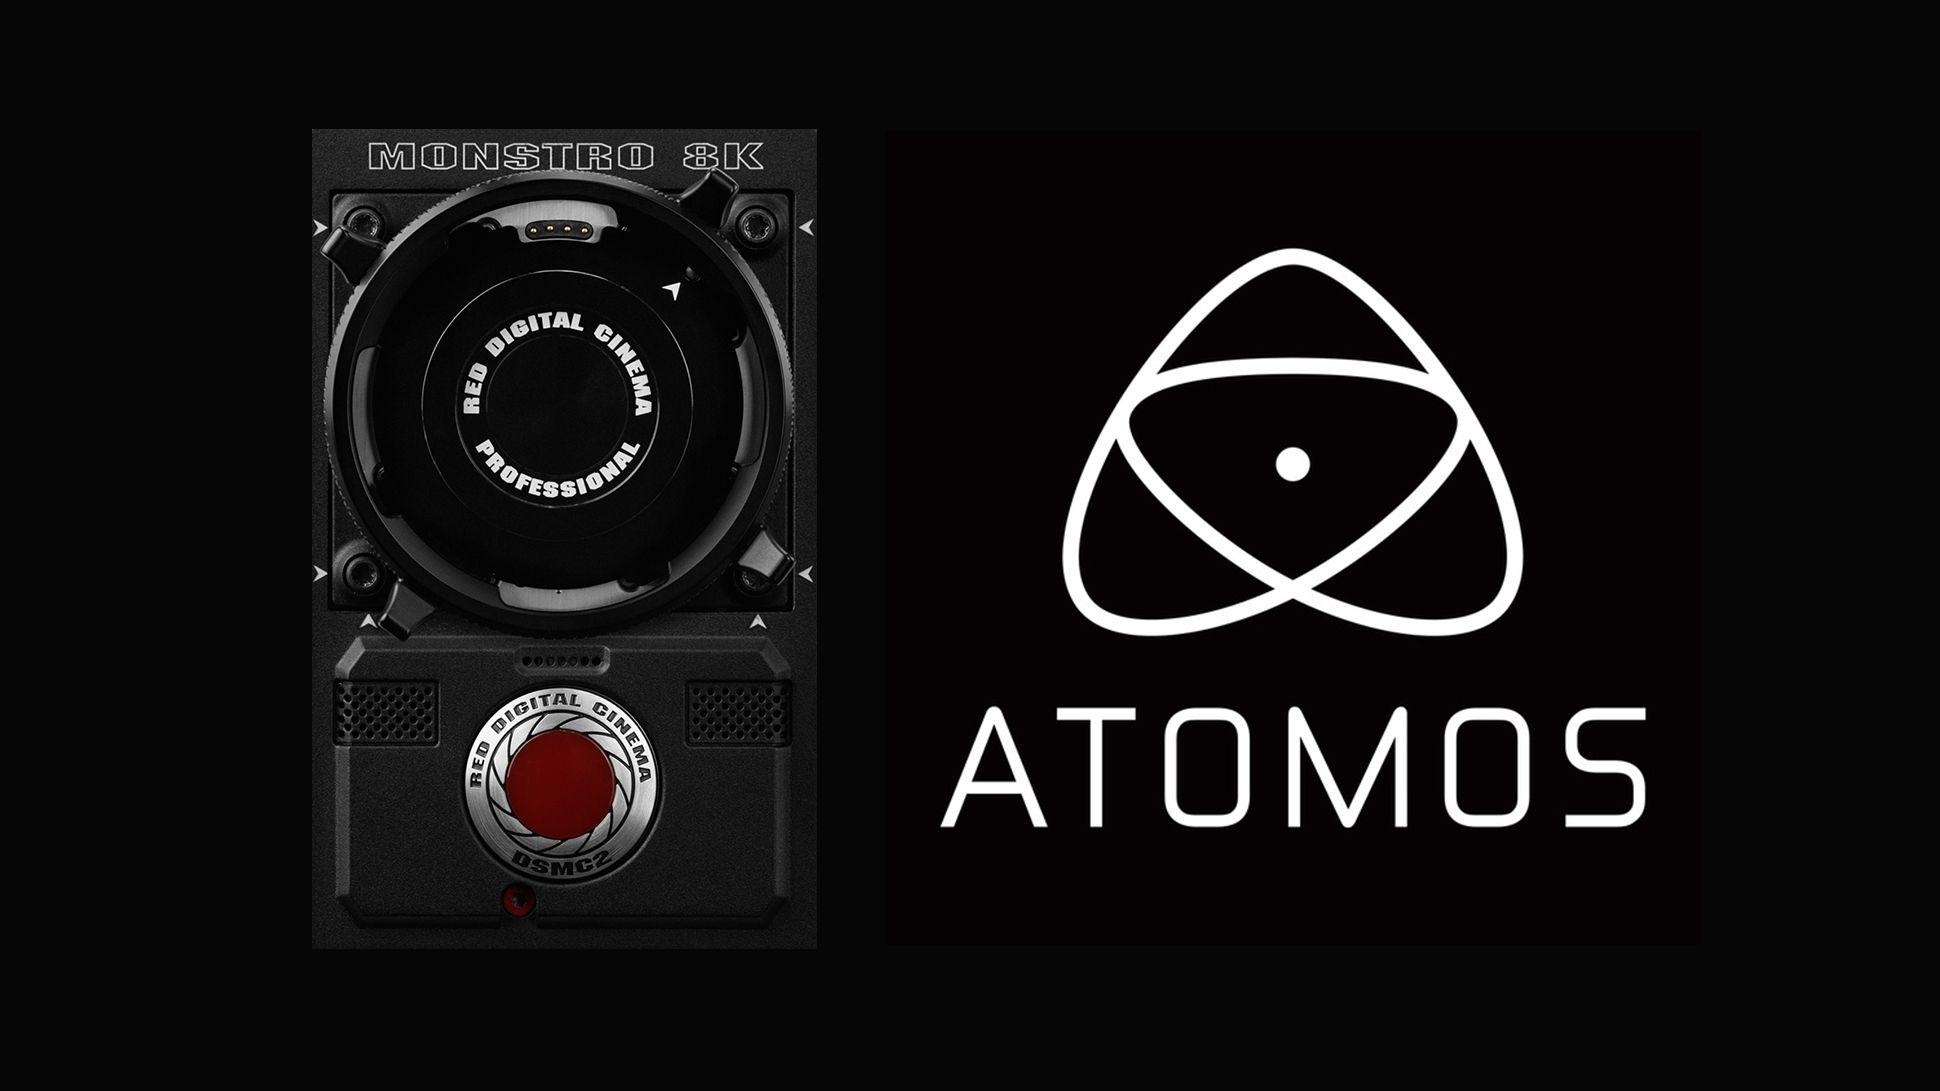 White Red Technology Logo - RedShark News - Here's a surprise! Atomos and RED sign an agreement ...